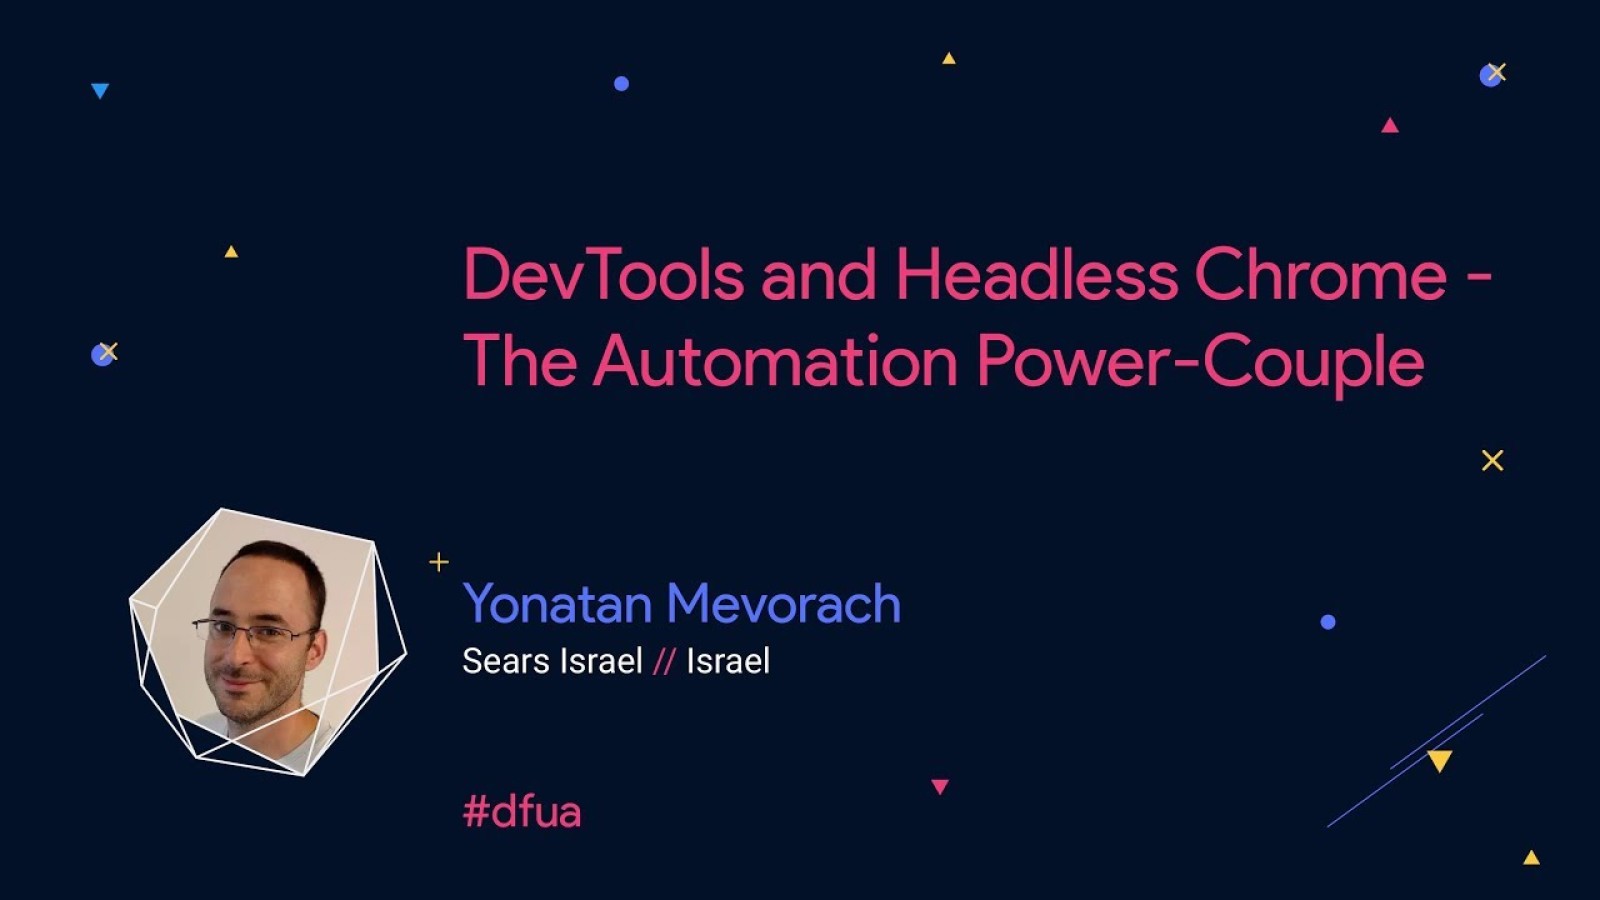 DevTools and Headless Chrome - The Automation Power-Couple